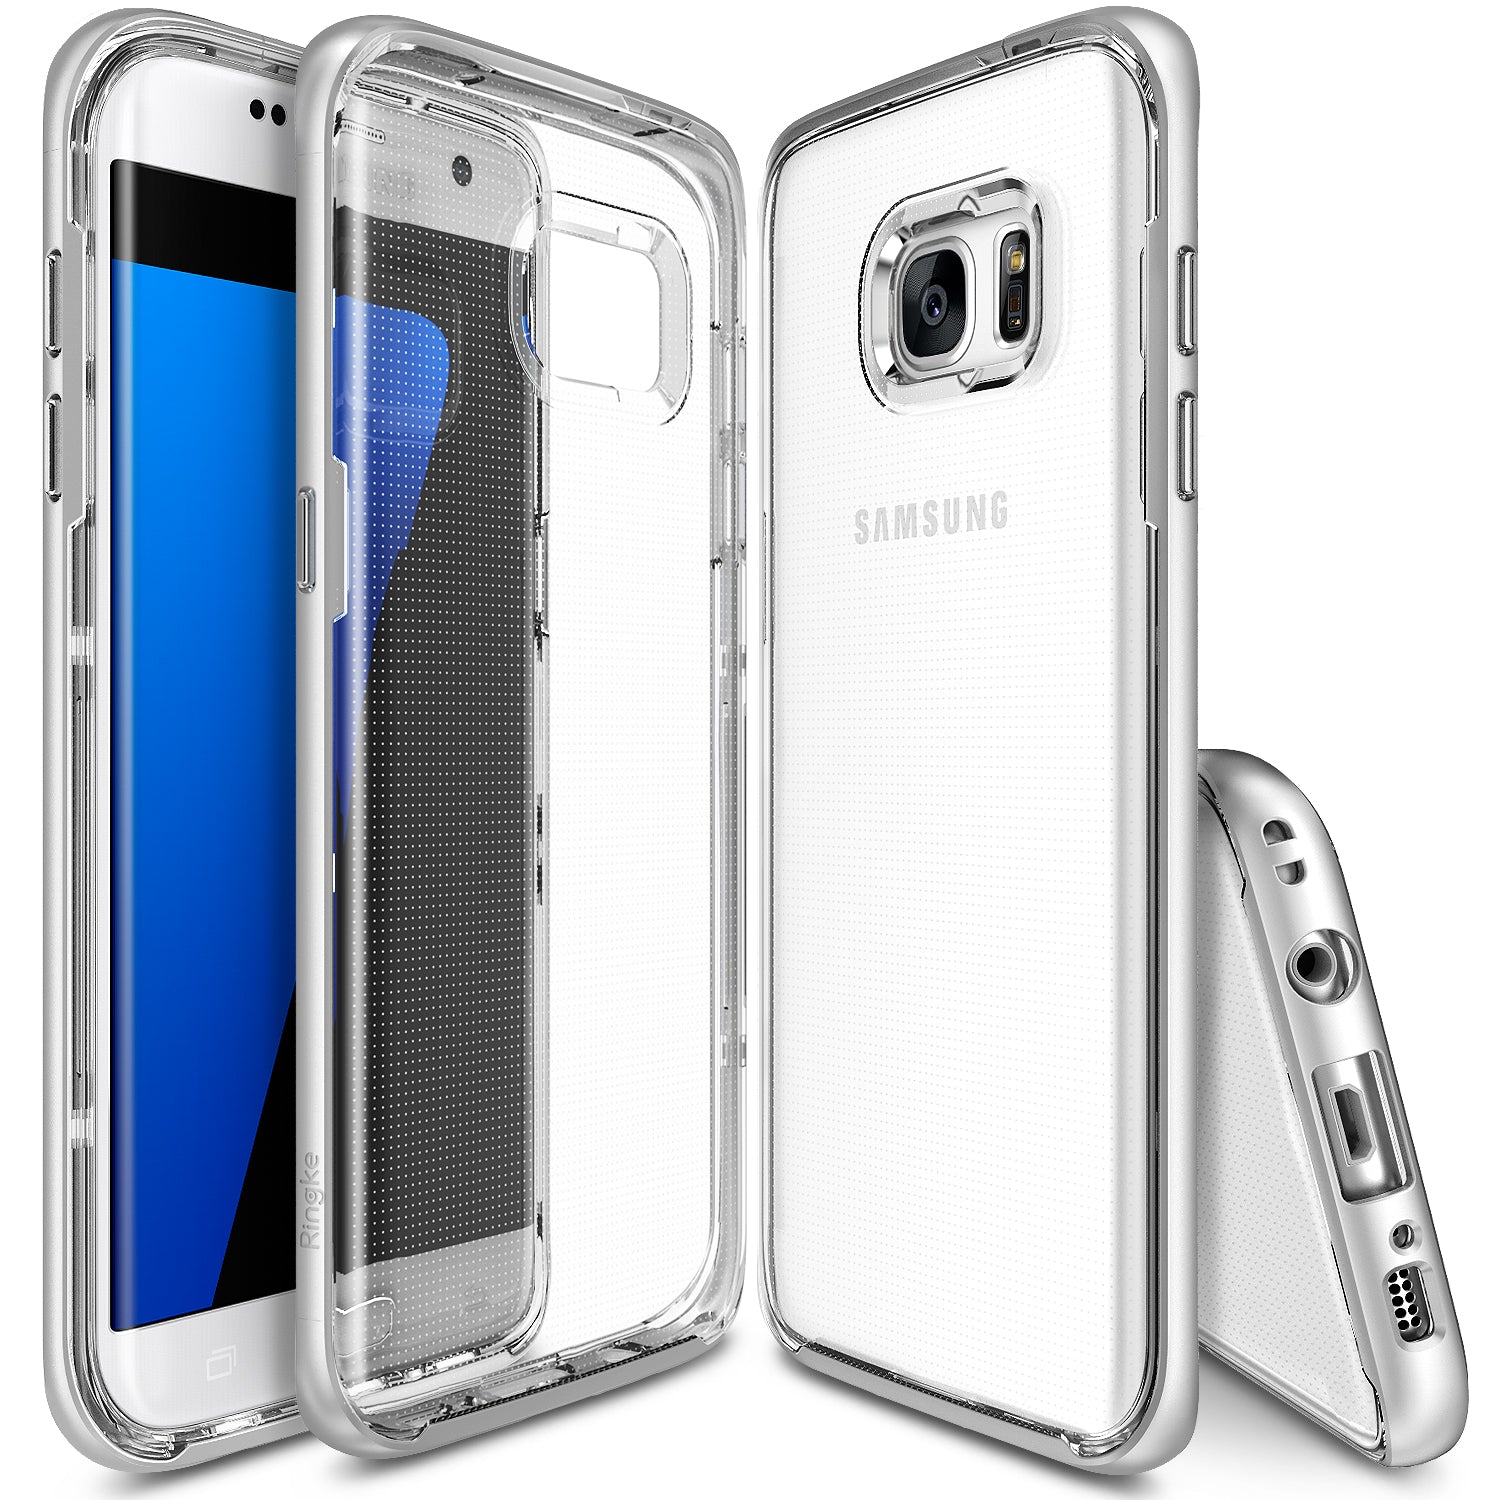 ringke frame clear back advanced bumper protection cover case for galaxy s7 edge ice silver